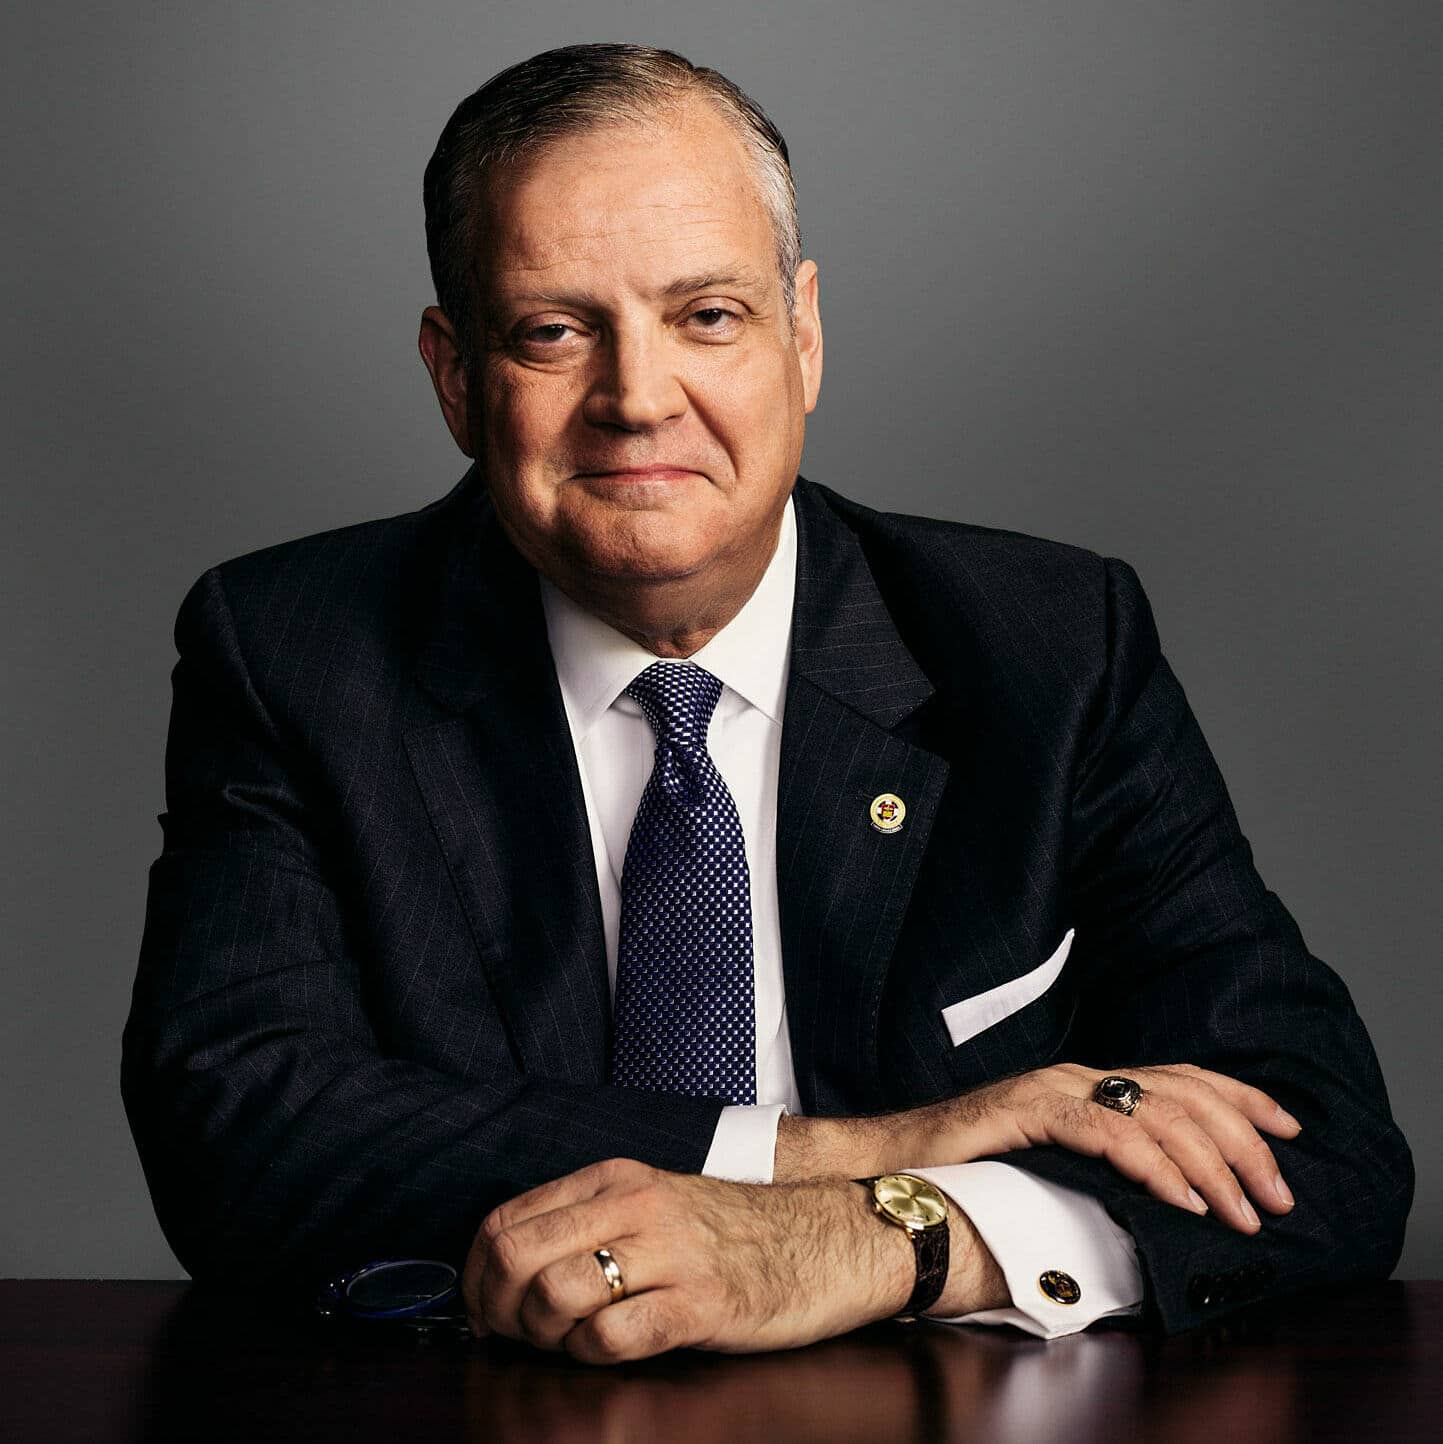 The Briefing with Albert Mohler